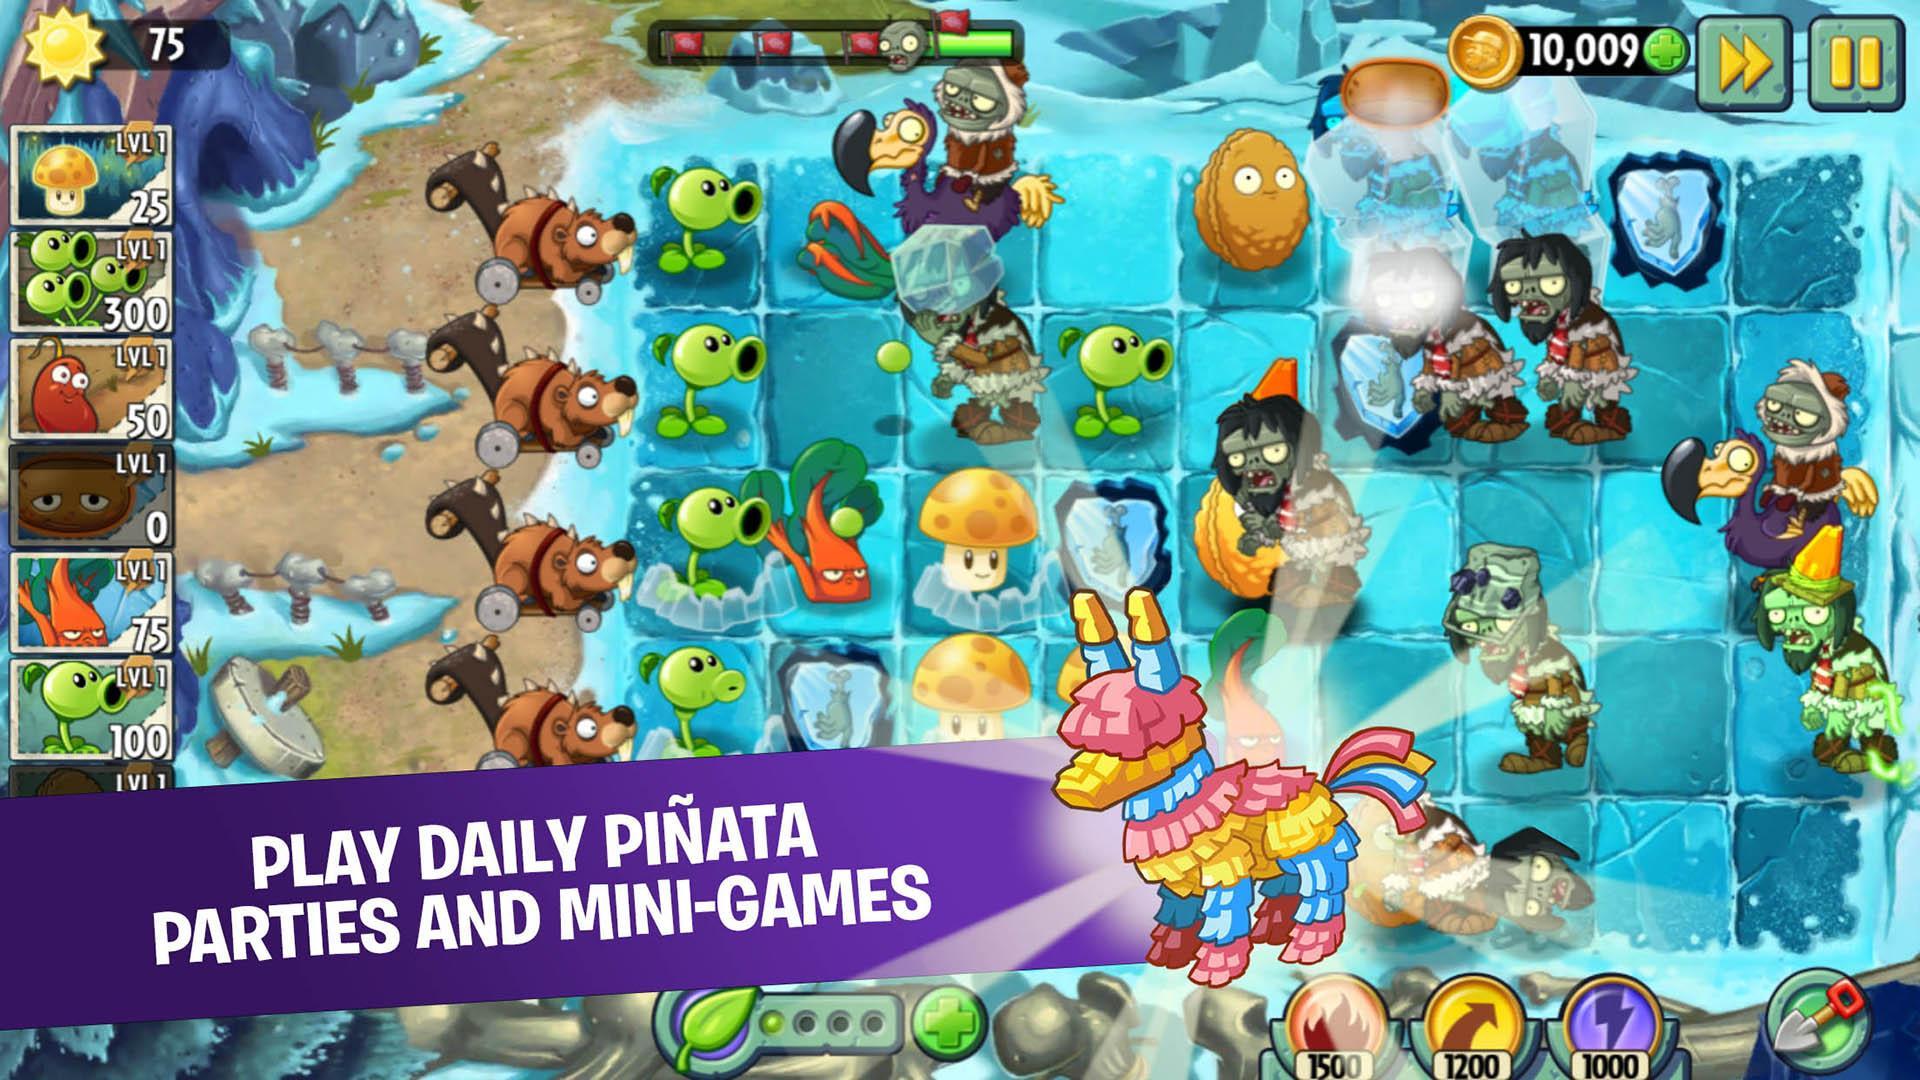 Plants Vs Zombies 2 Apk Download Free Tower Defense Game For